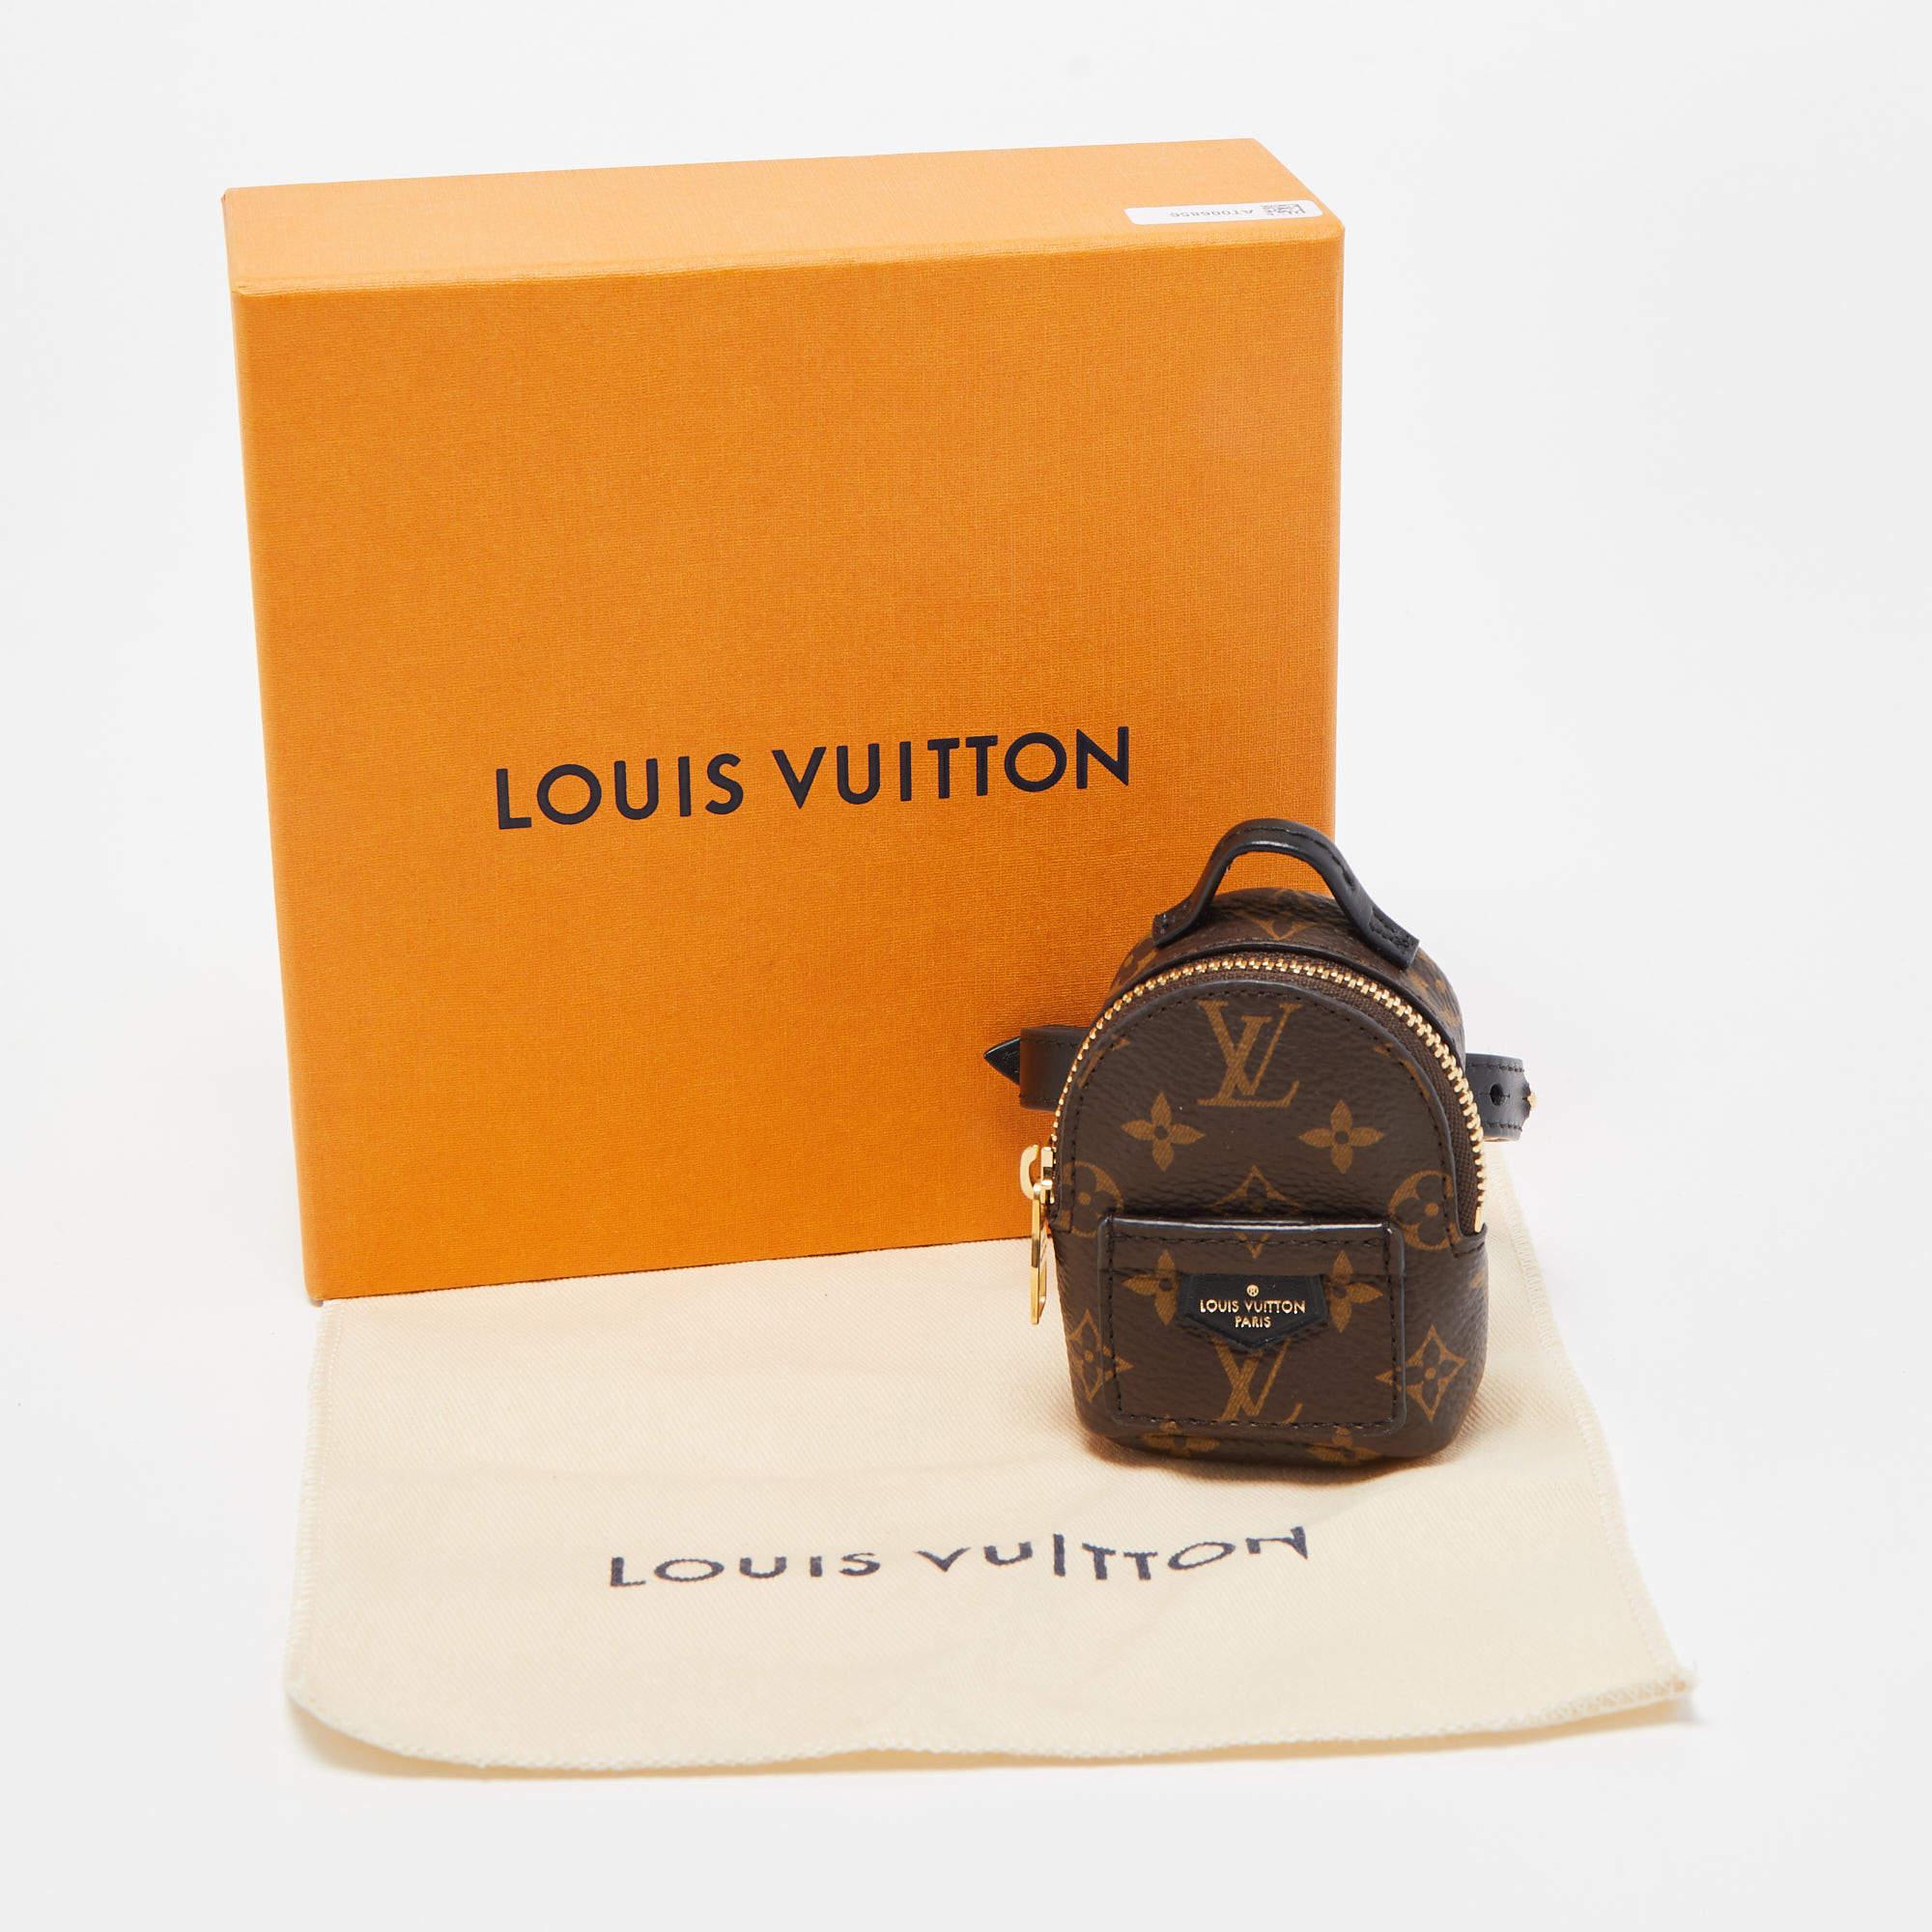 The Louis Vuitton Party Palm Springs bracelet is a luxurious accessory featuring the iconic LV monogram pattern on canvas. Designed to wrap around the wrist, it exudes elegance with a touch of casual charm, making it the perfect addition to any